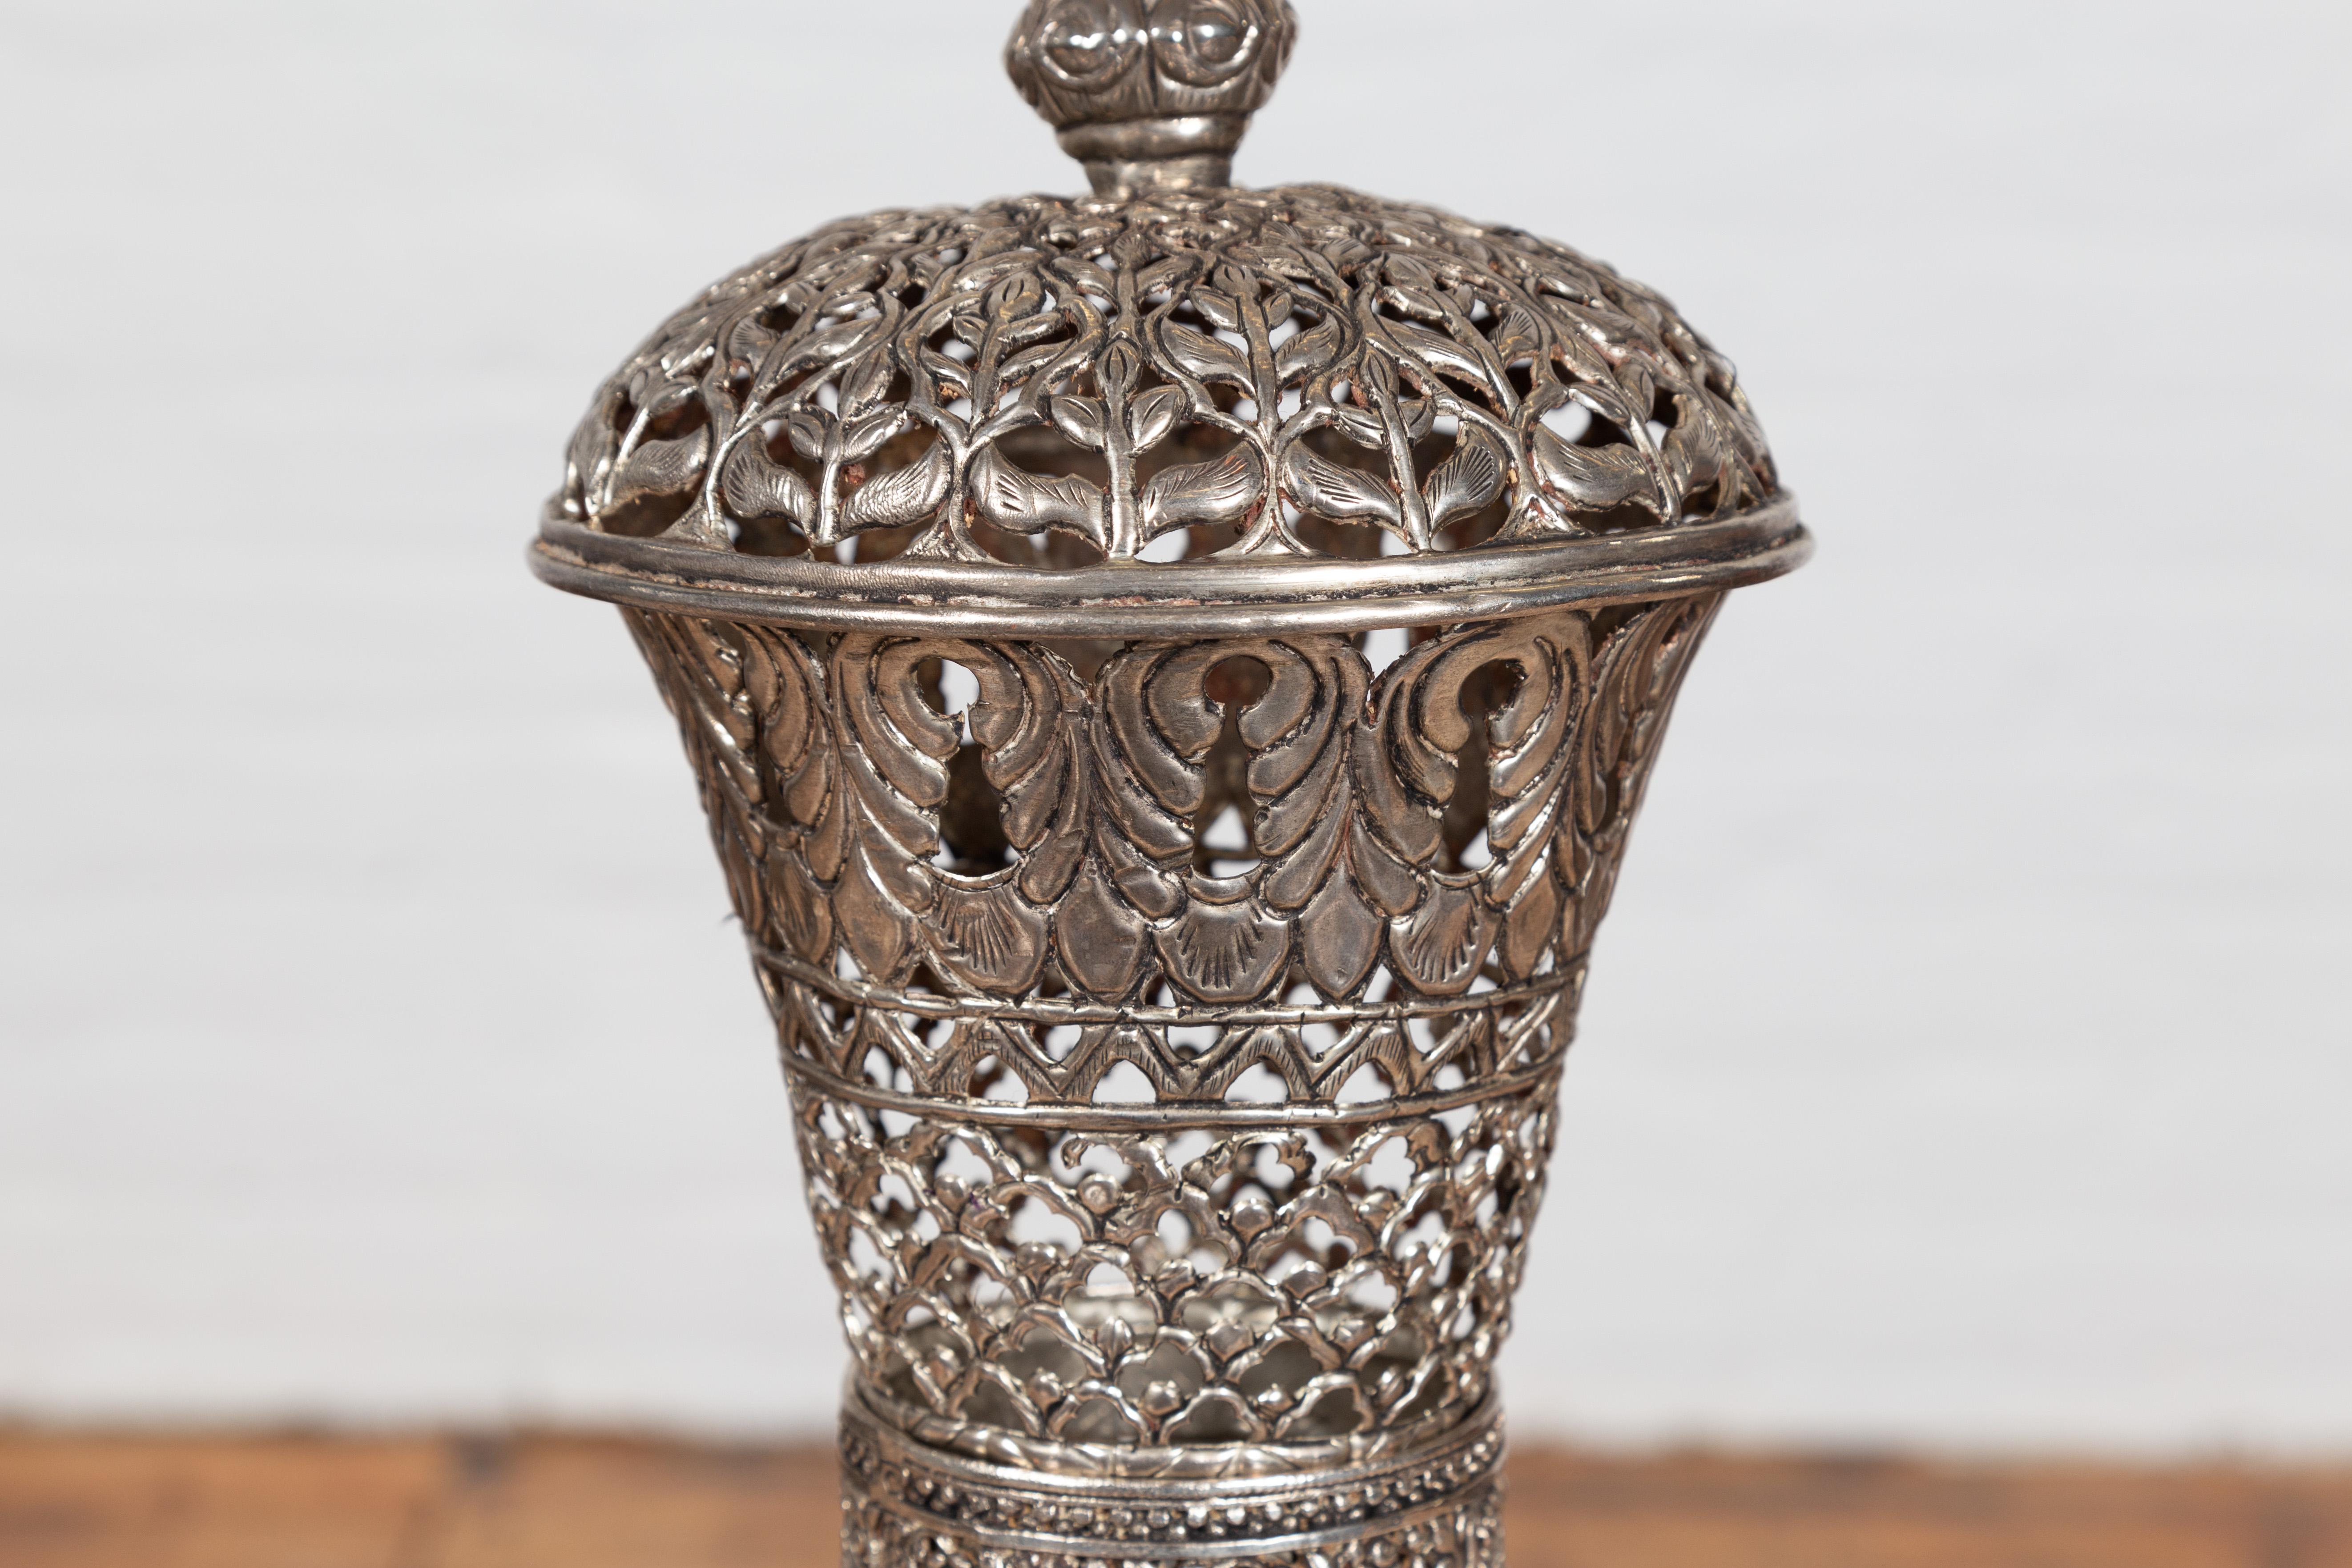 Indian Vintage Silverplate Brass Covered Candle Holder with Open Fretwork 1